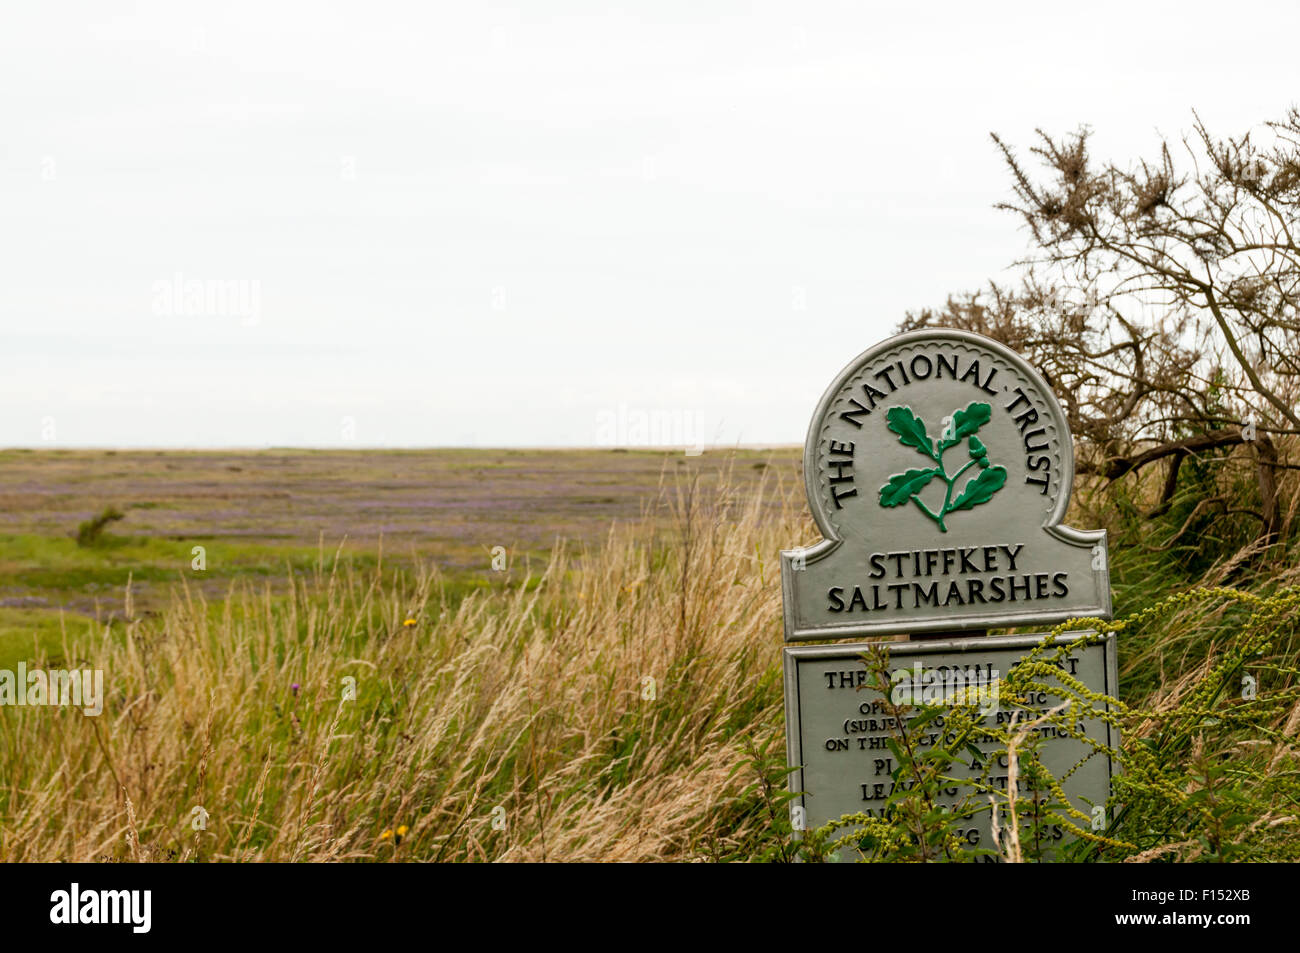 A National Trust sign for Stiffkey Saltmarshes on the North Norfolk coast. Stock Photo